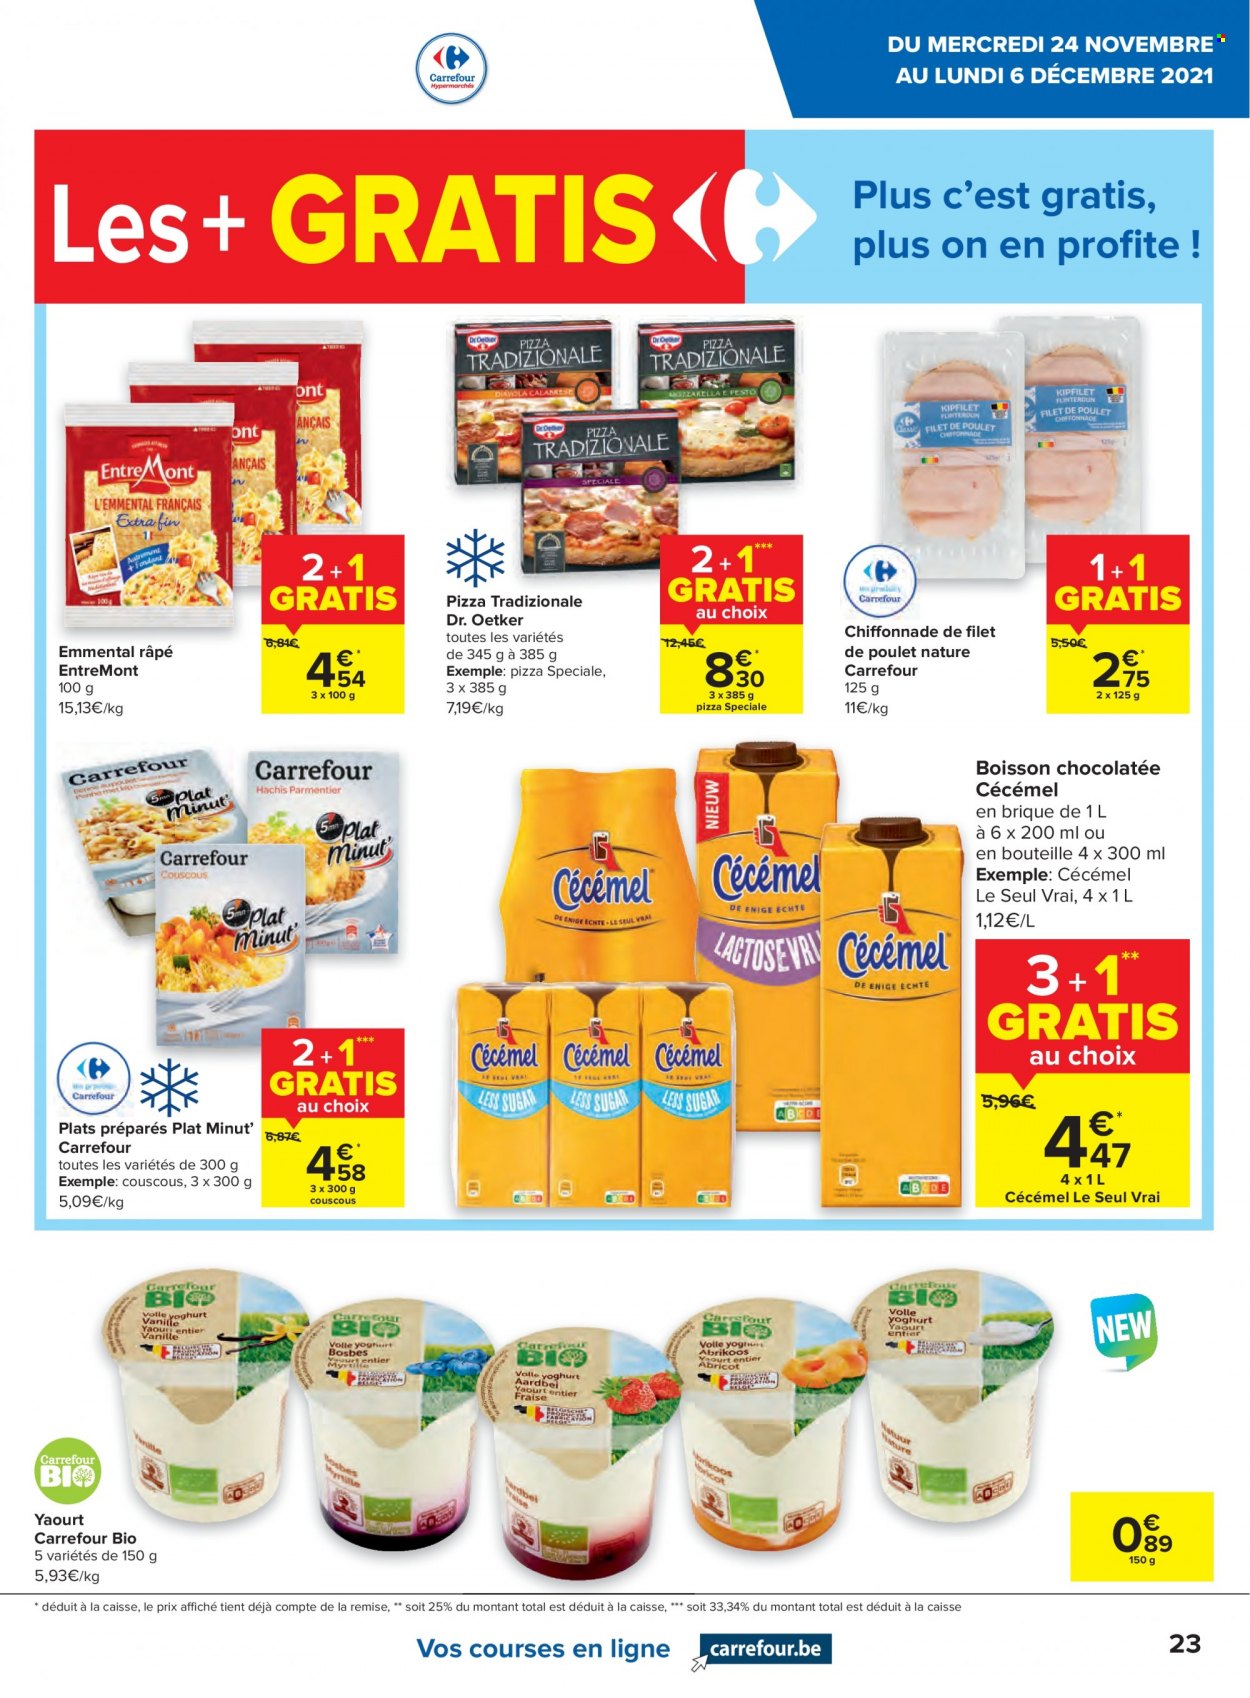 Catalogue Carrefour hypermarkt - 24.11.2021 - 6.12.2021. Page 23.